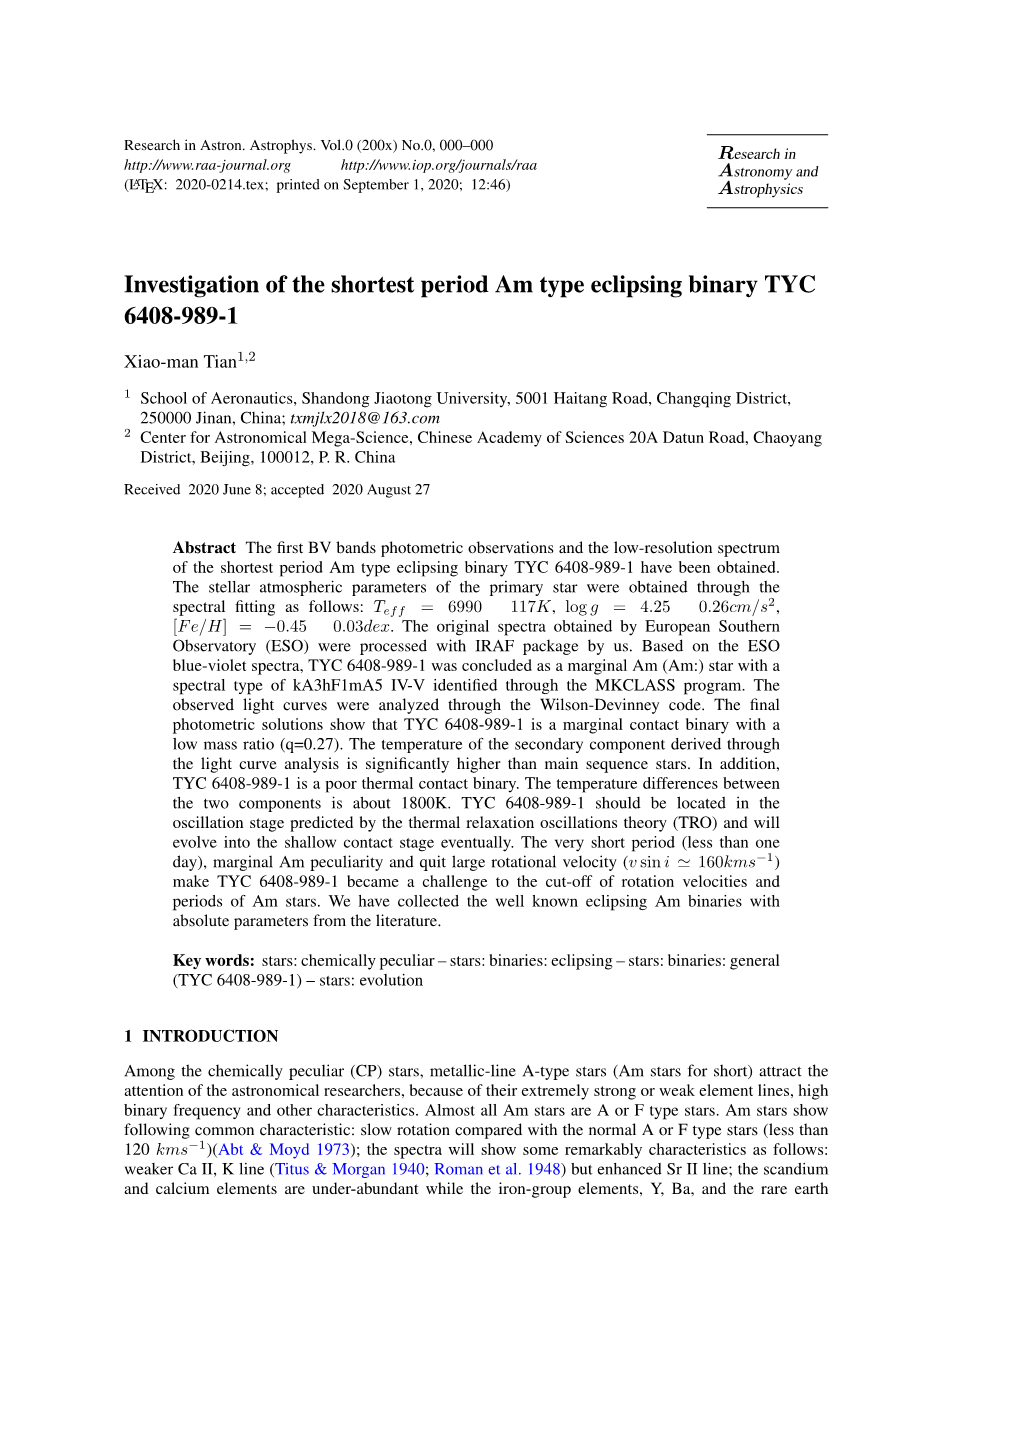 Investigation of the Shortest Period Am Type Eclipsing Binary TYC 6408-989-1